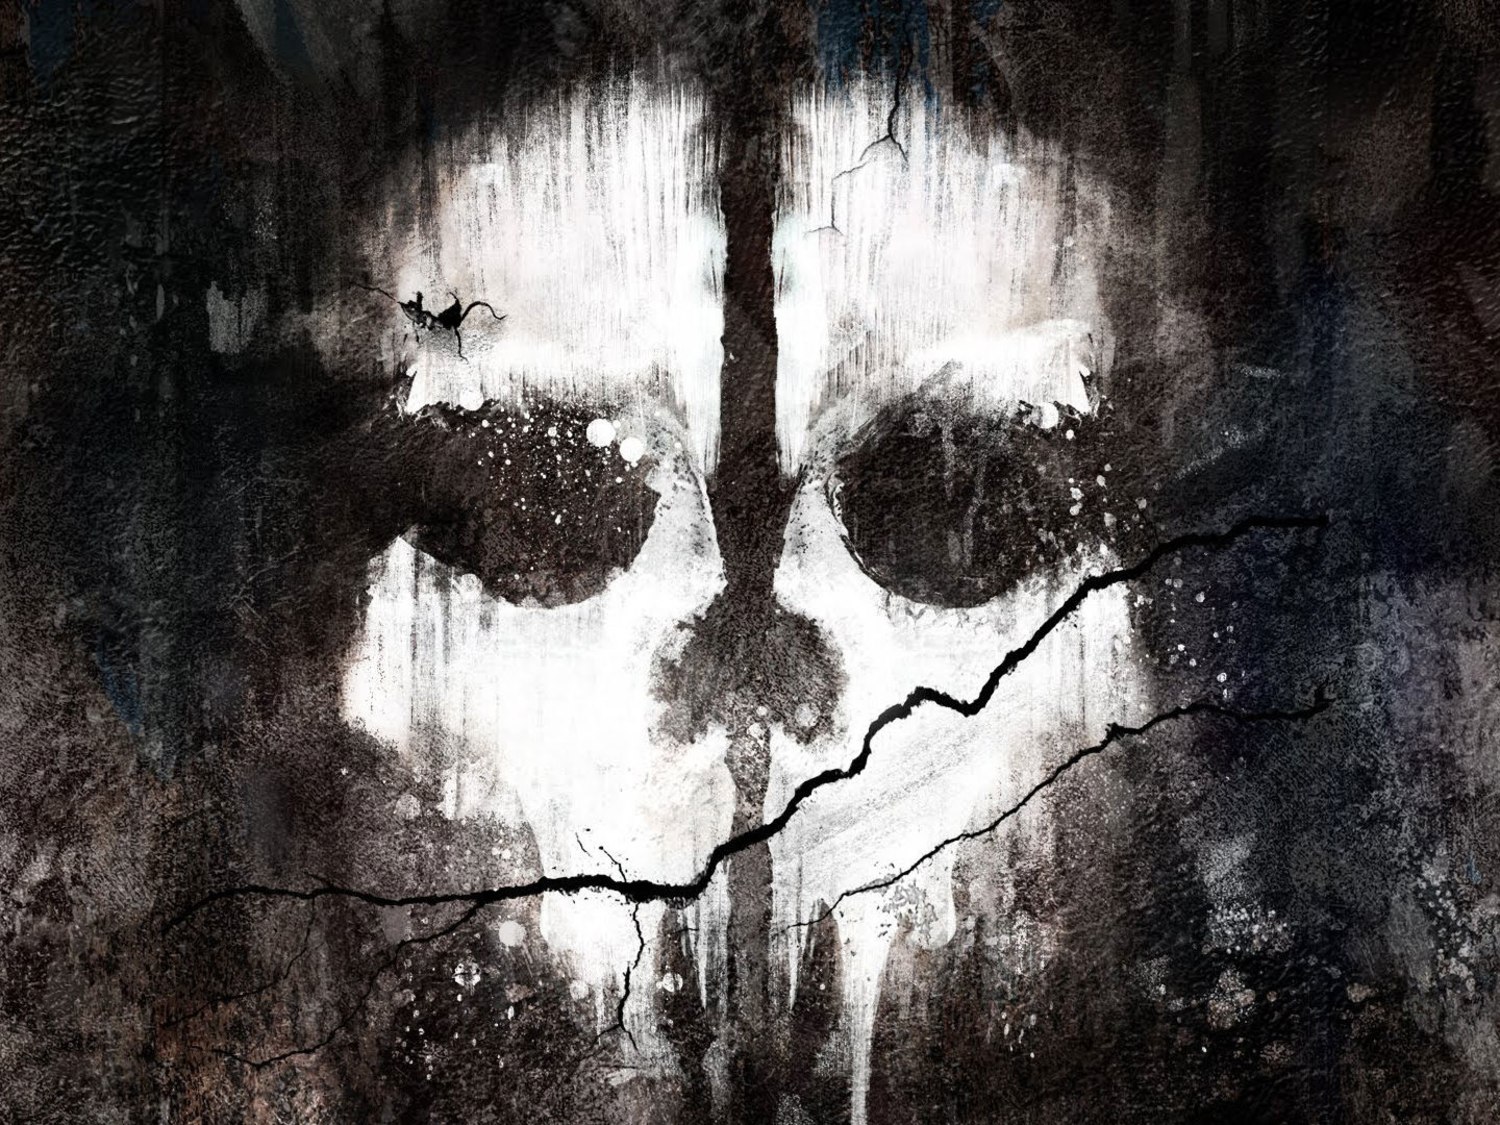  Call of Duty: Ghosts - Xbox 360 : Activision Inc